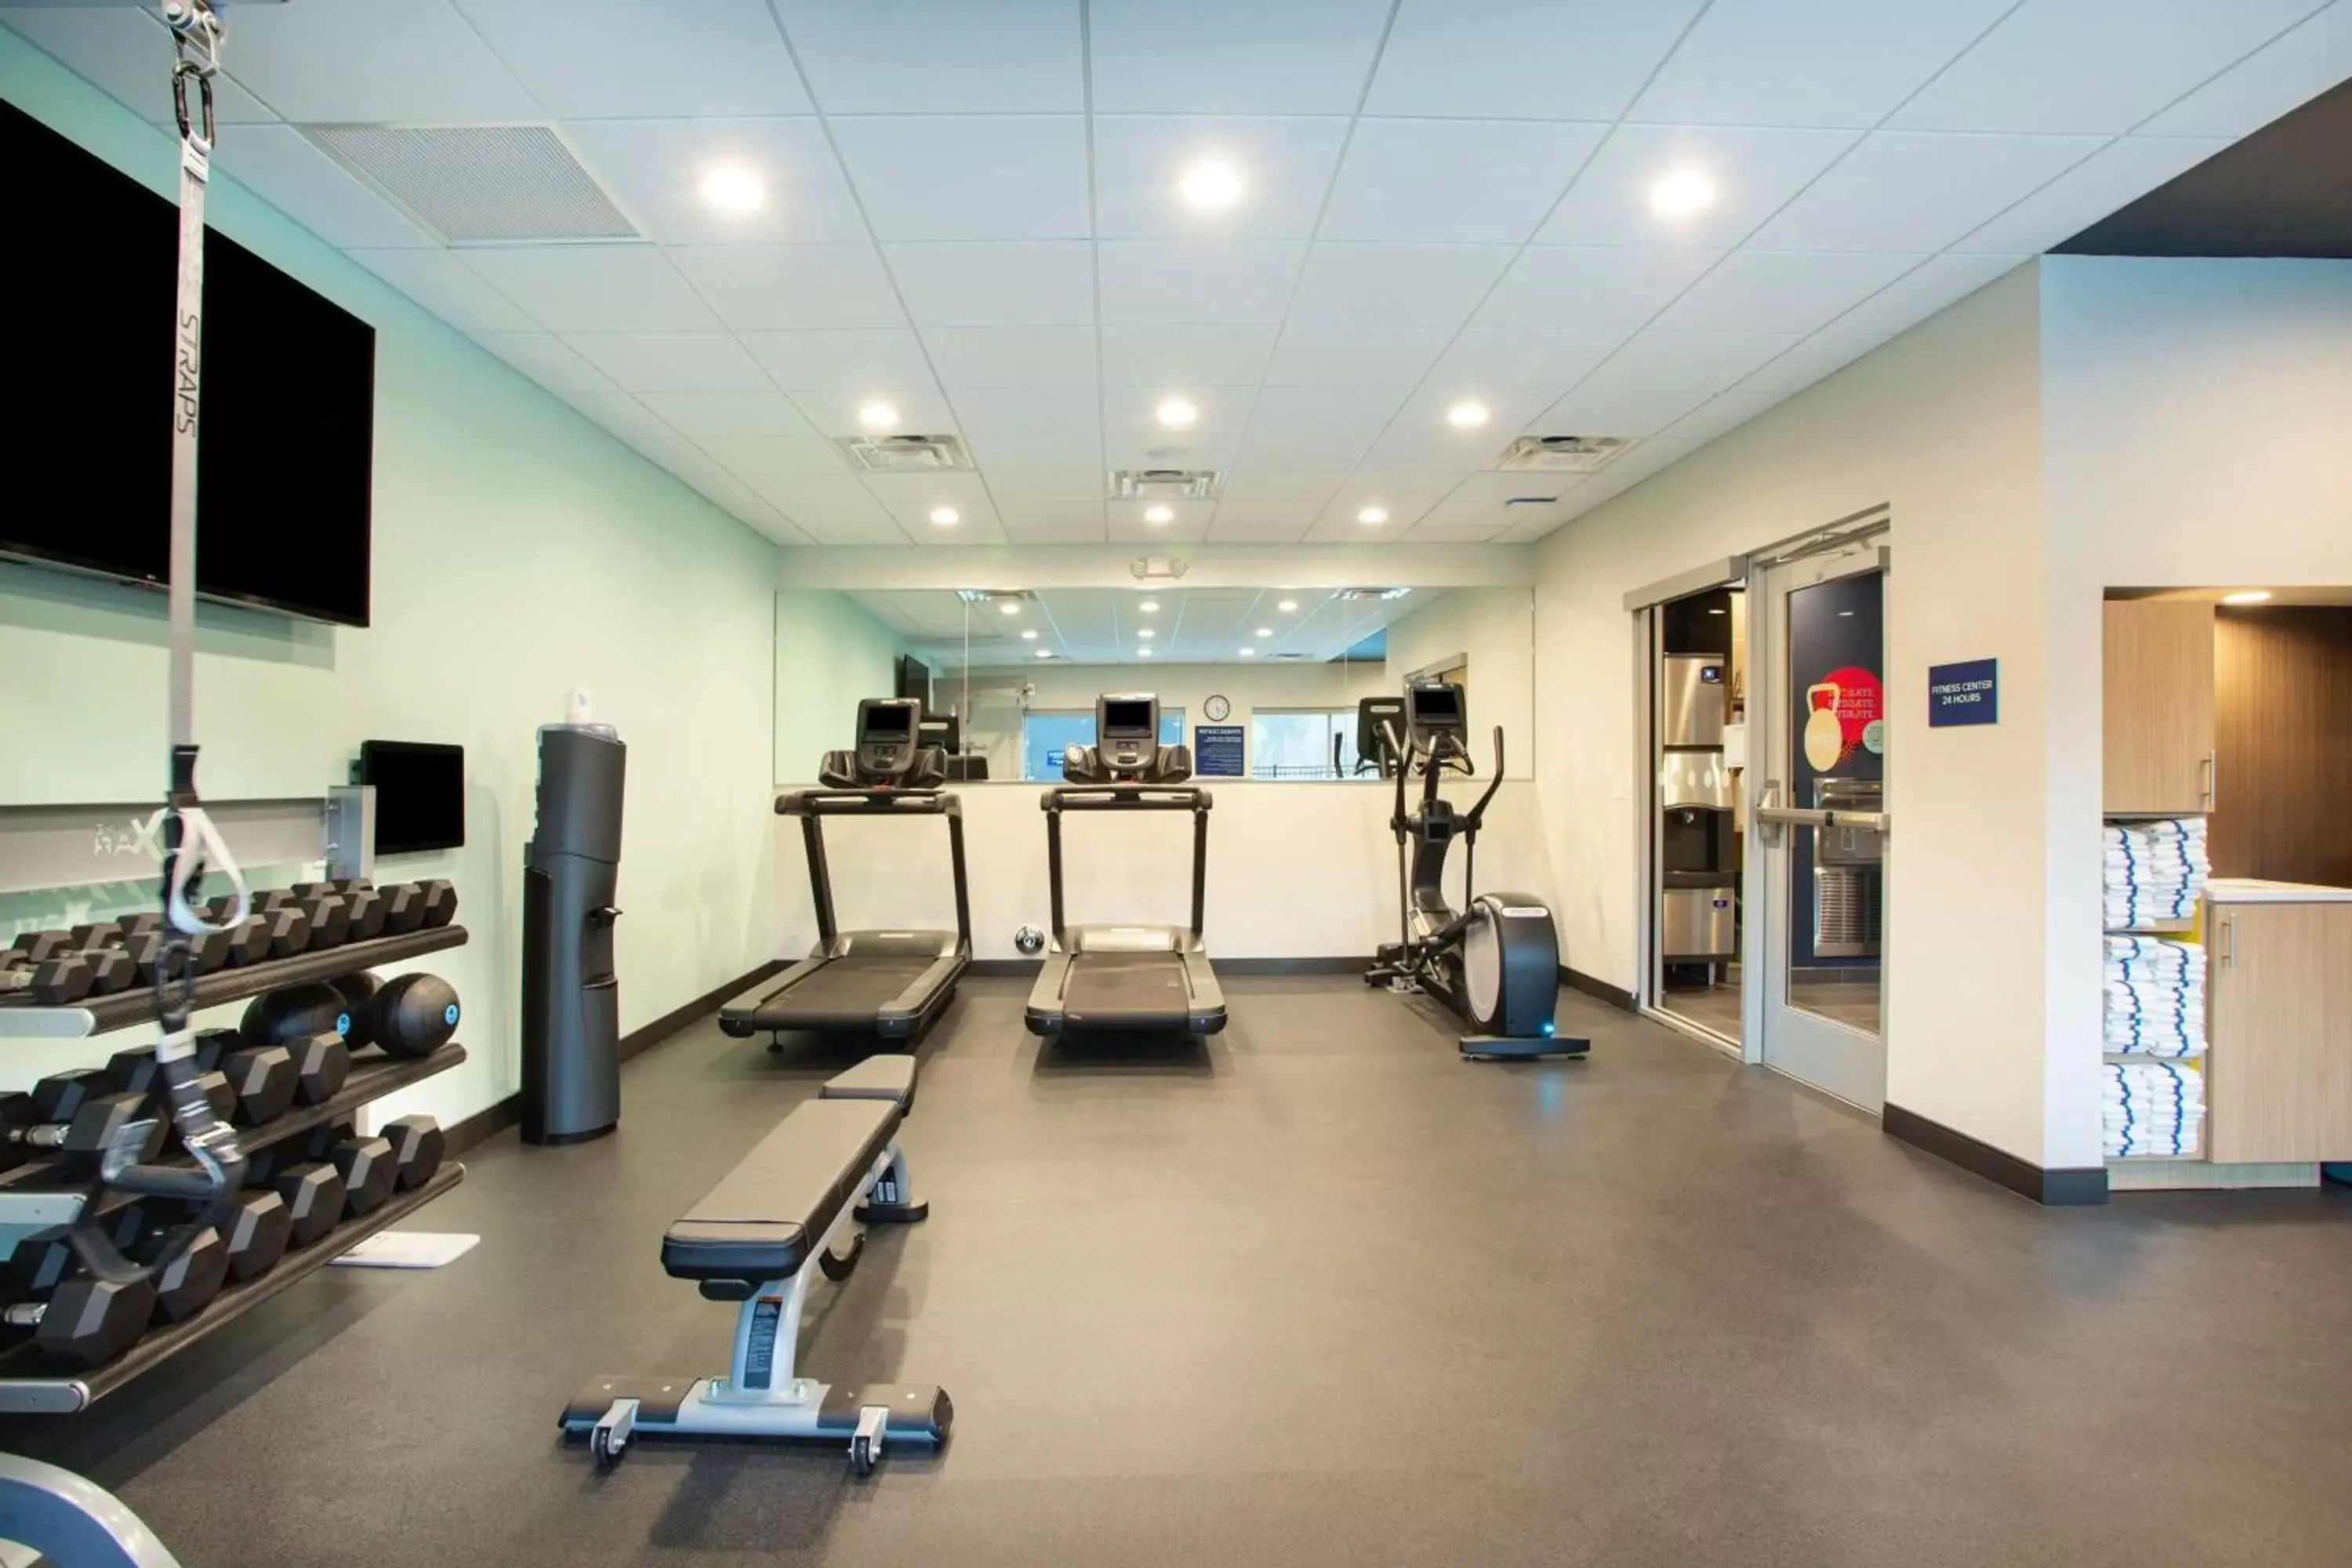 Fitness centre/facilities, Fitness Center/Facilities in Tru By Hilton Asheville East, NC